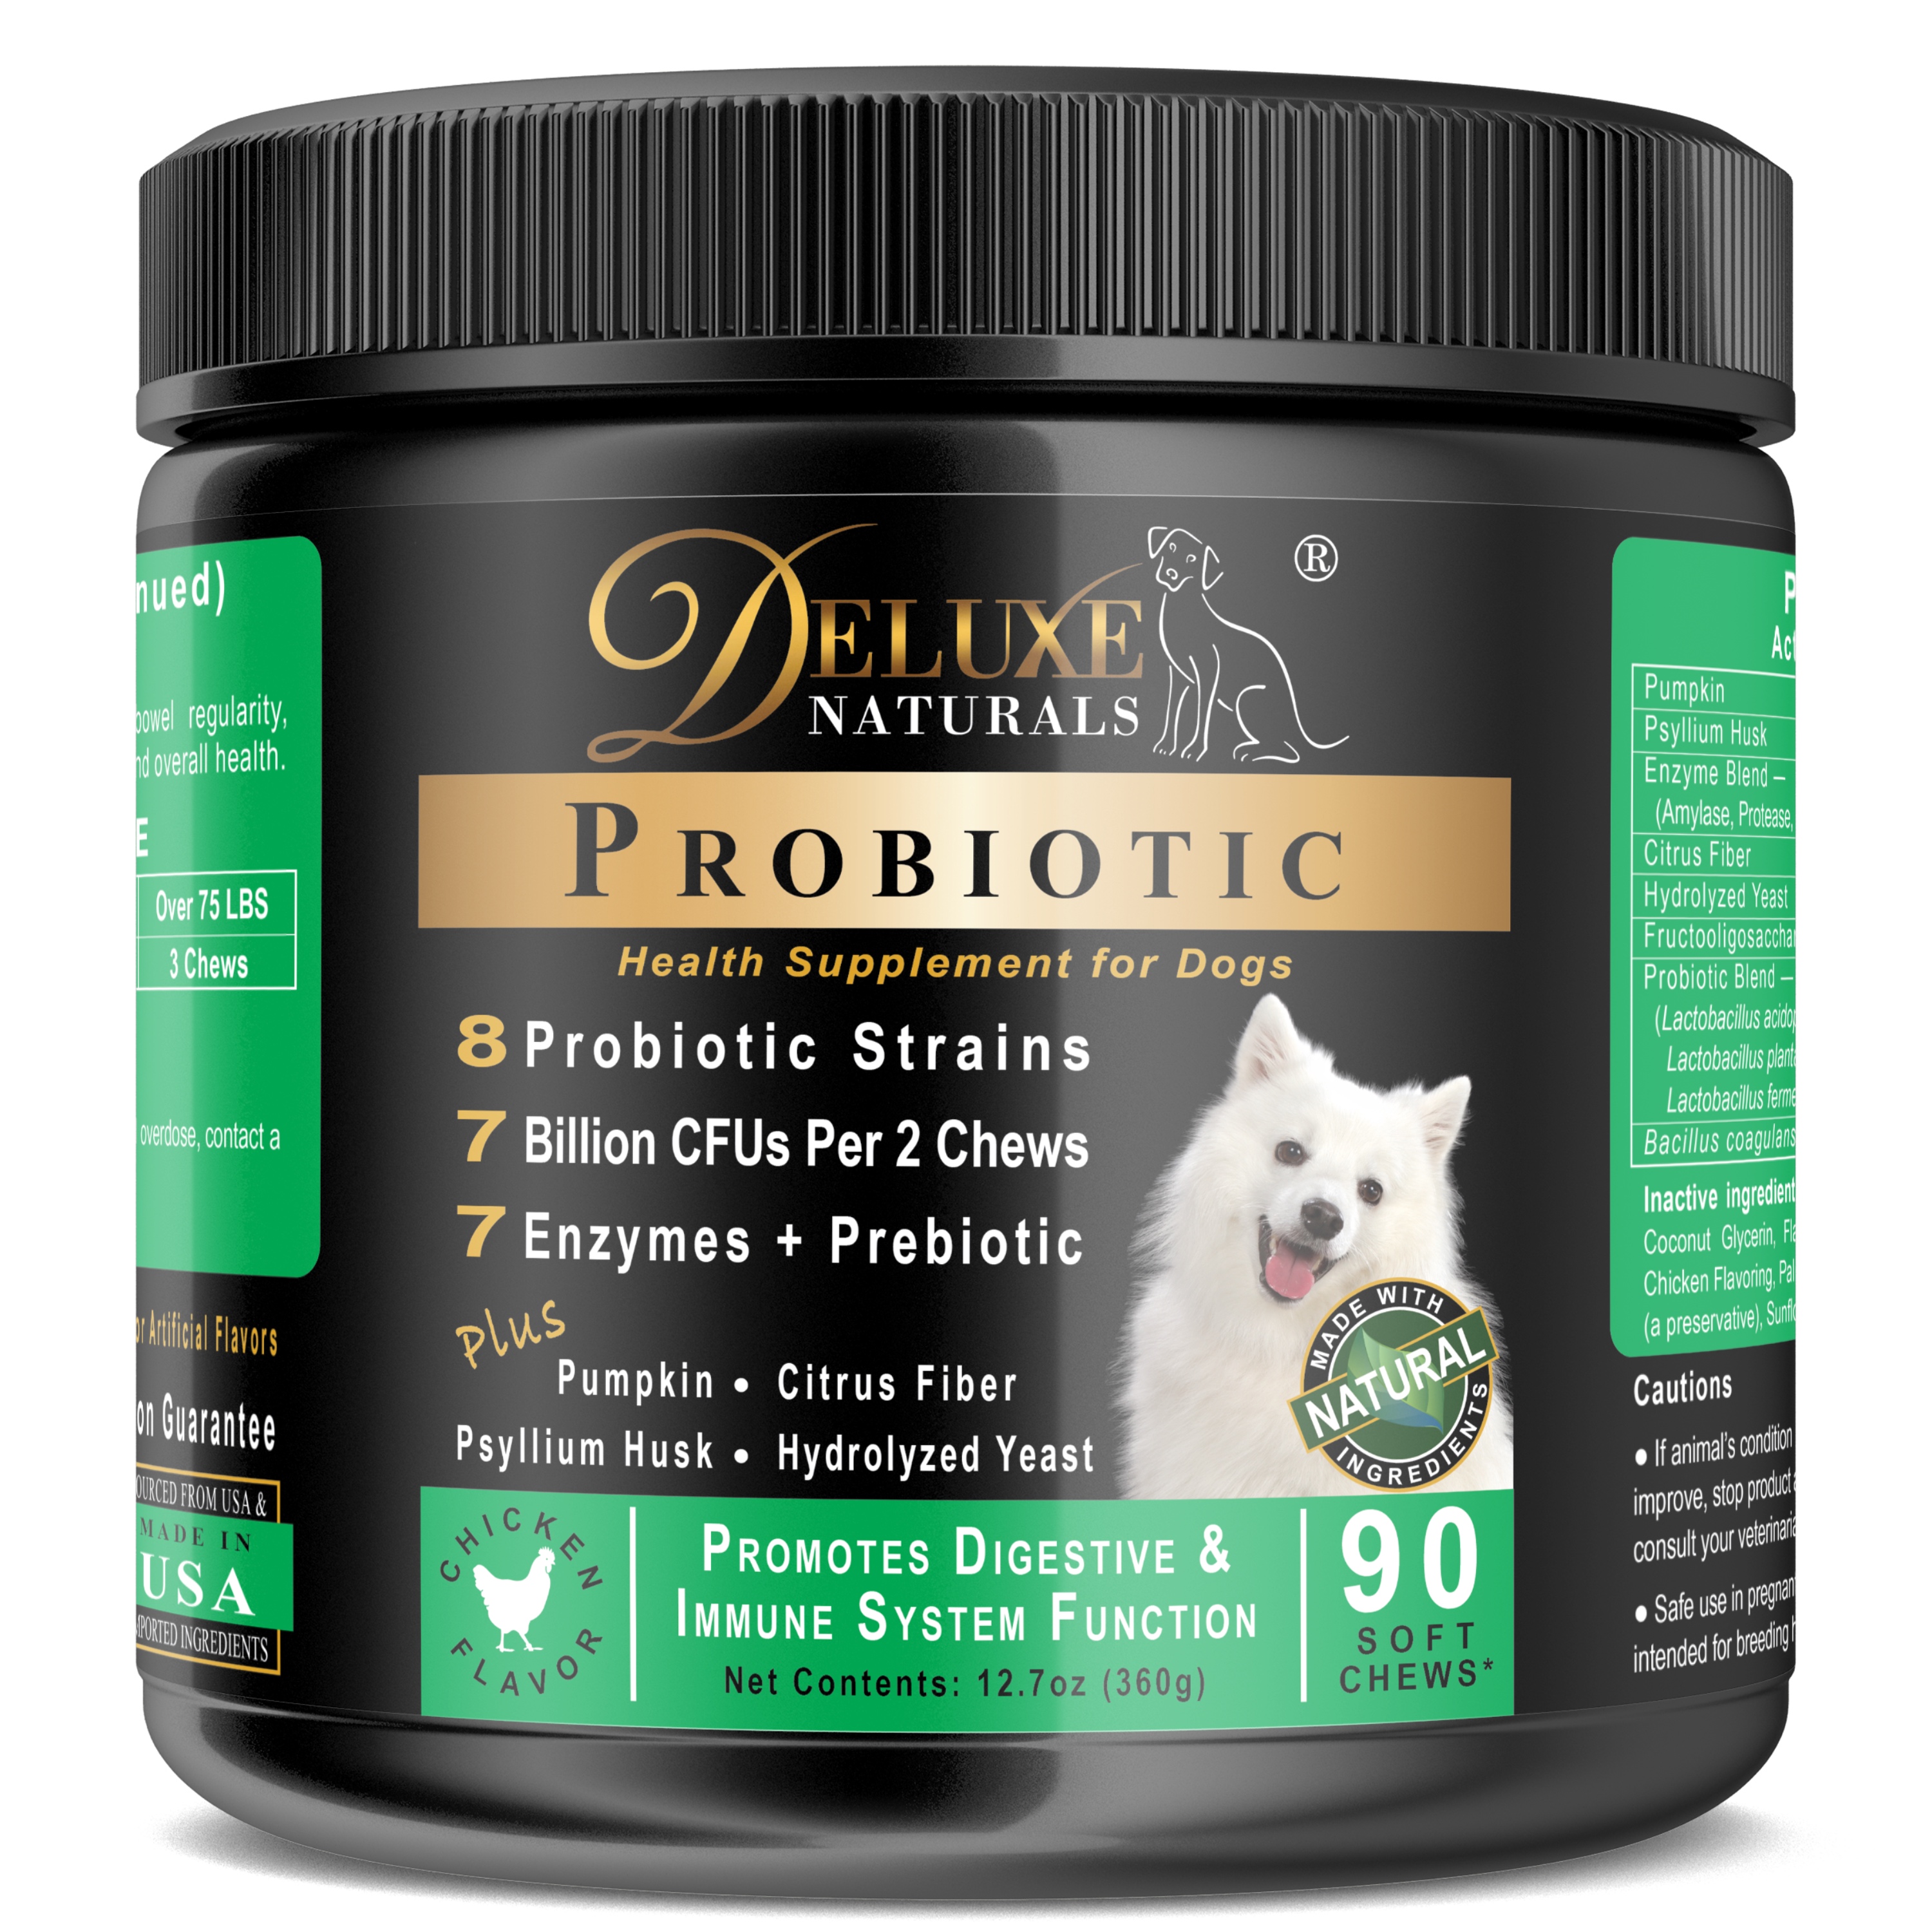 Deluxe Naturals Probiotics for Dogs | All-Natural Dog Probiotic Soft Chews with Enzymes, Prebiotics, Pumpkin | Promotes Digestive Health, Improves Allergy & Immunity - 90 Count (Pack of 1) - image 5 of 10